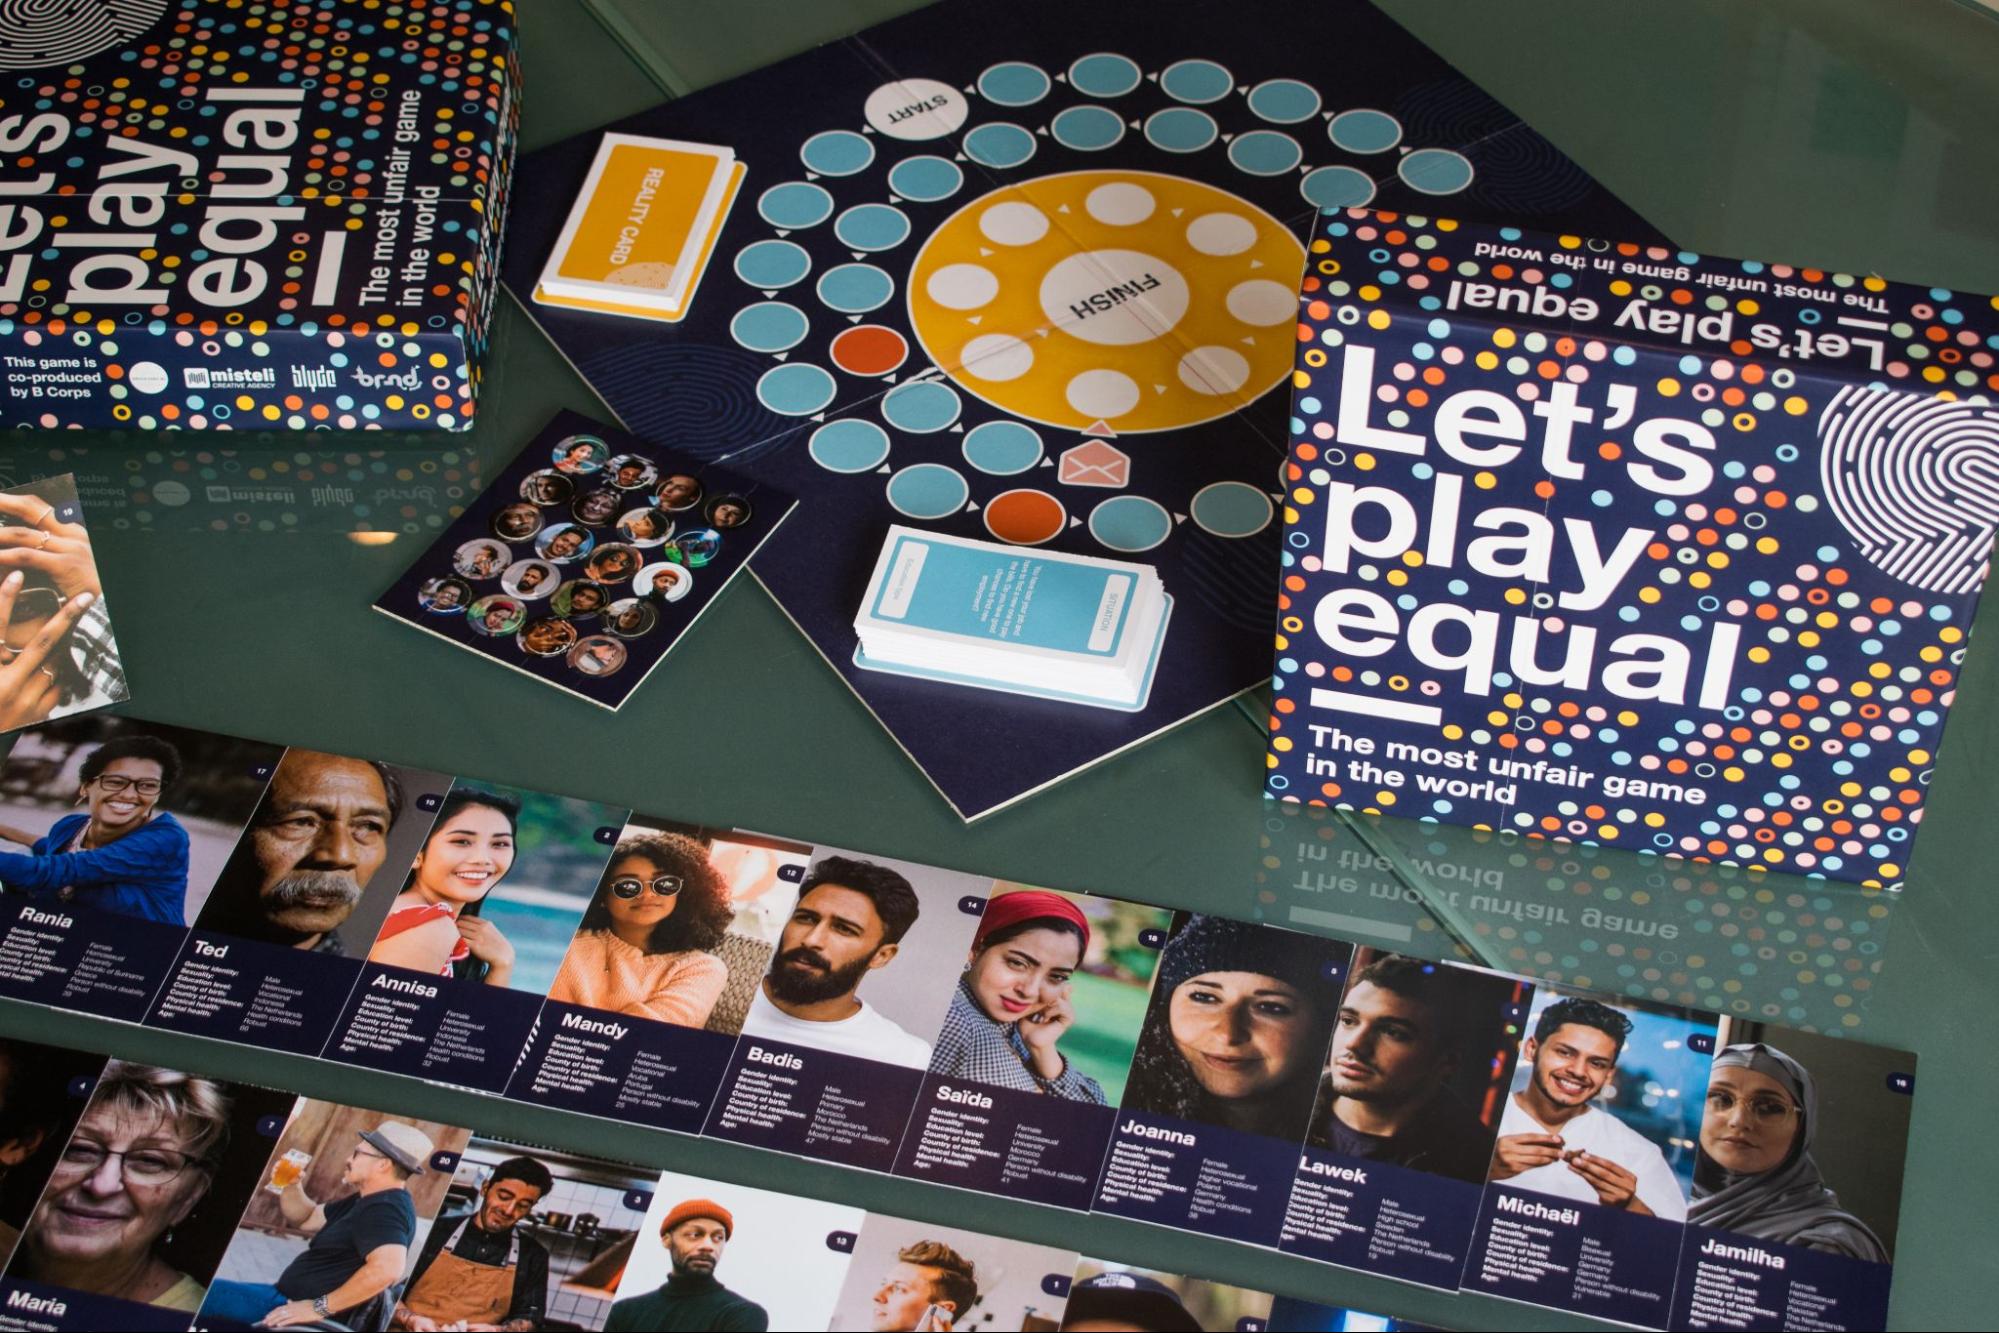 Let’s play equal – a game by B Corps designed to reflect on justice, equity, diversity and inclusion